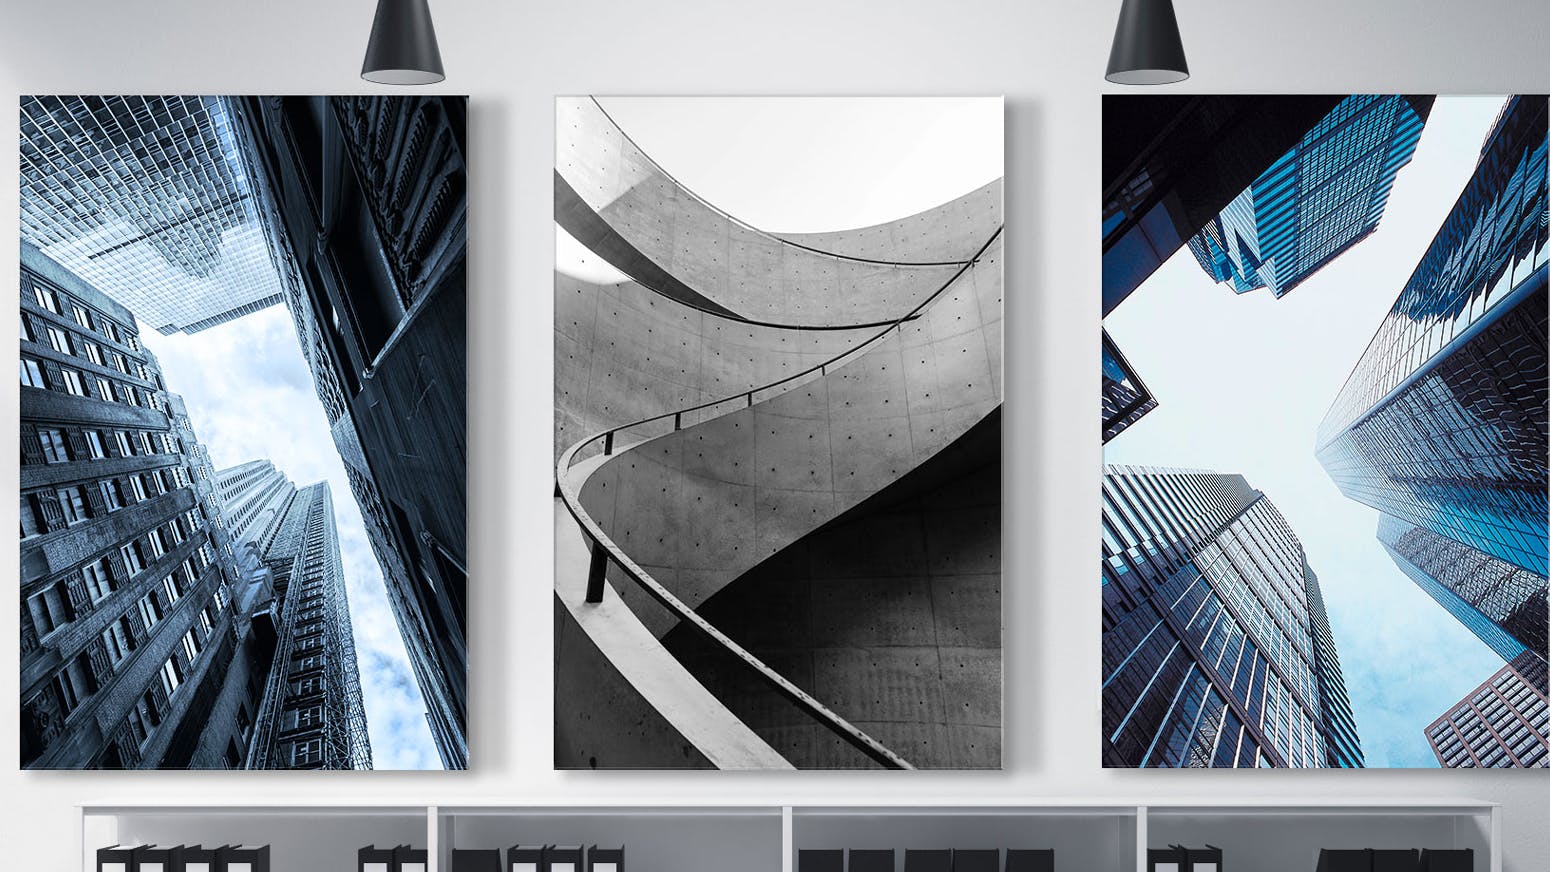 Large acrylic print with architecture images in an office